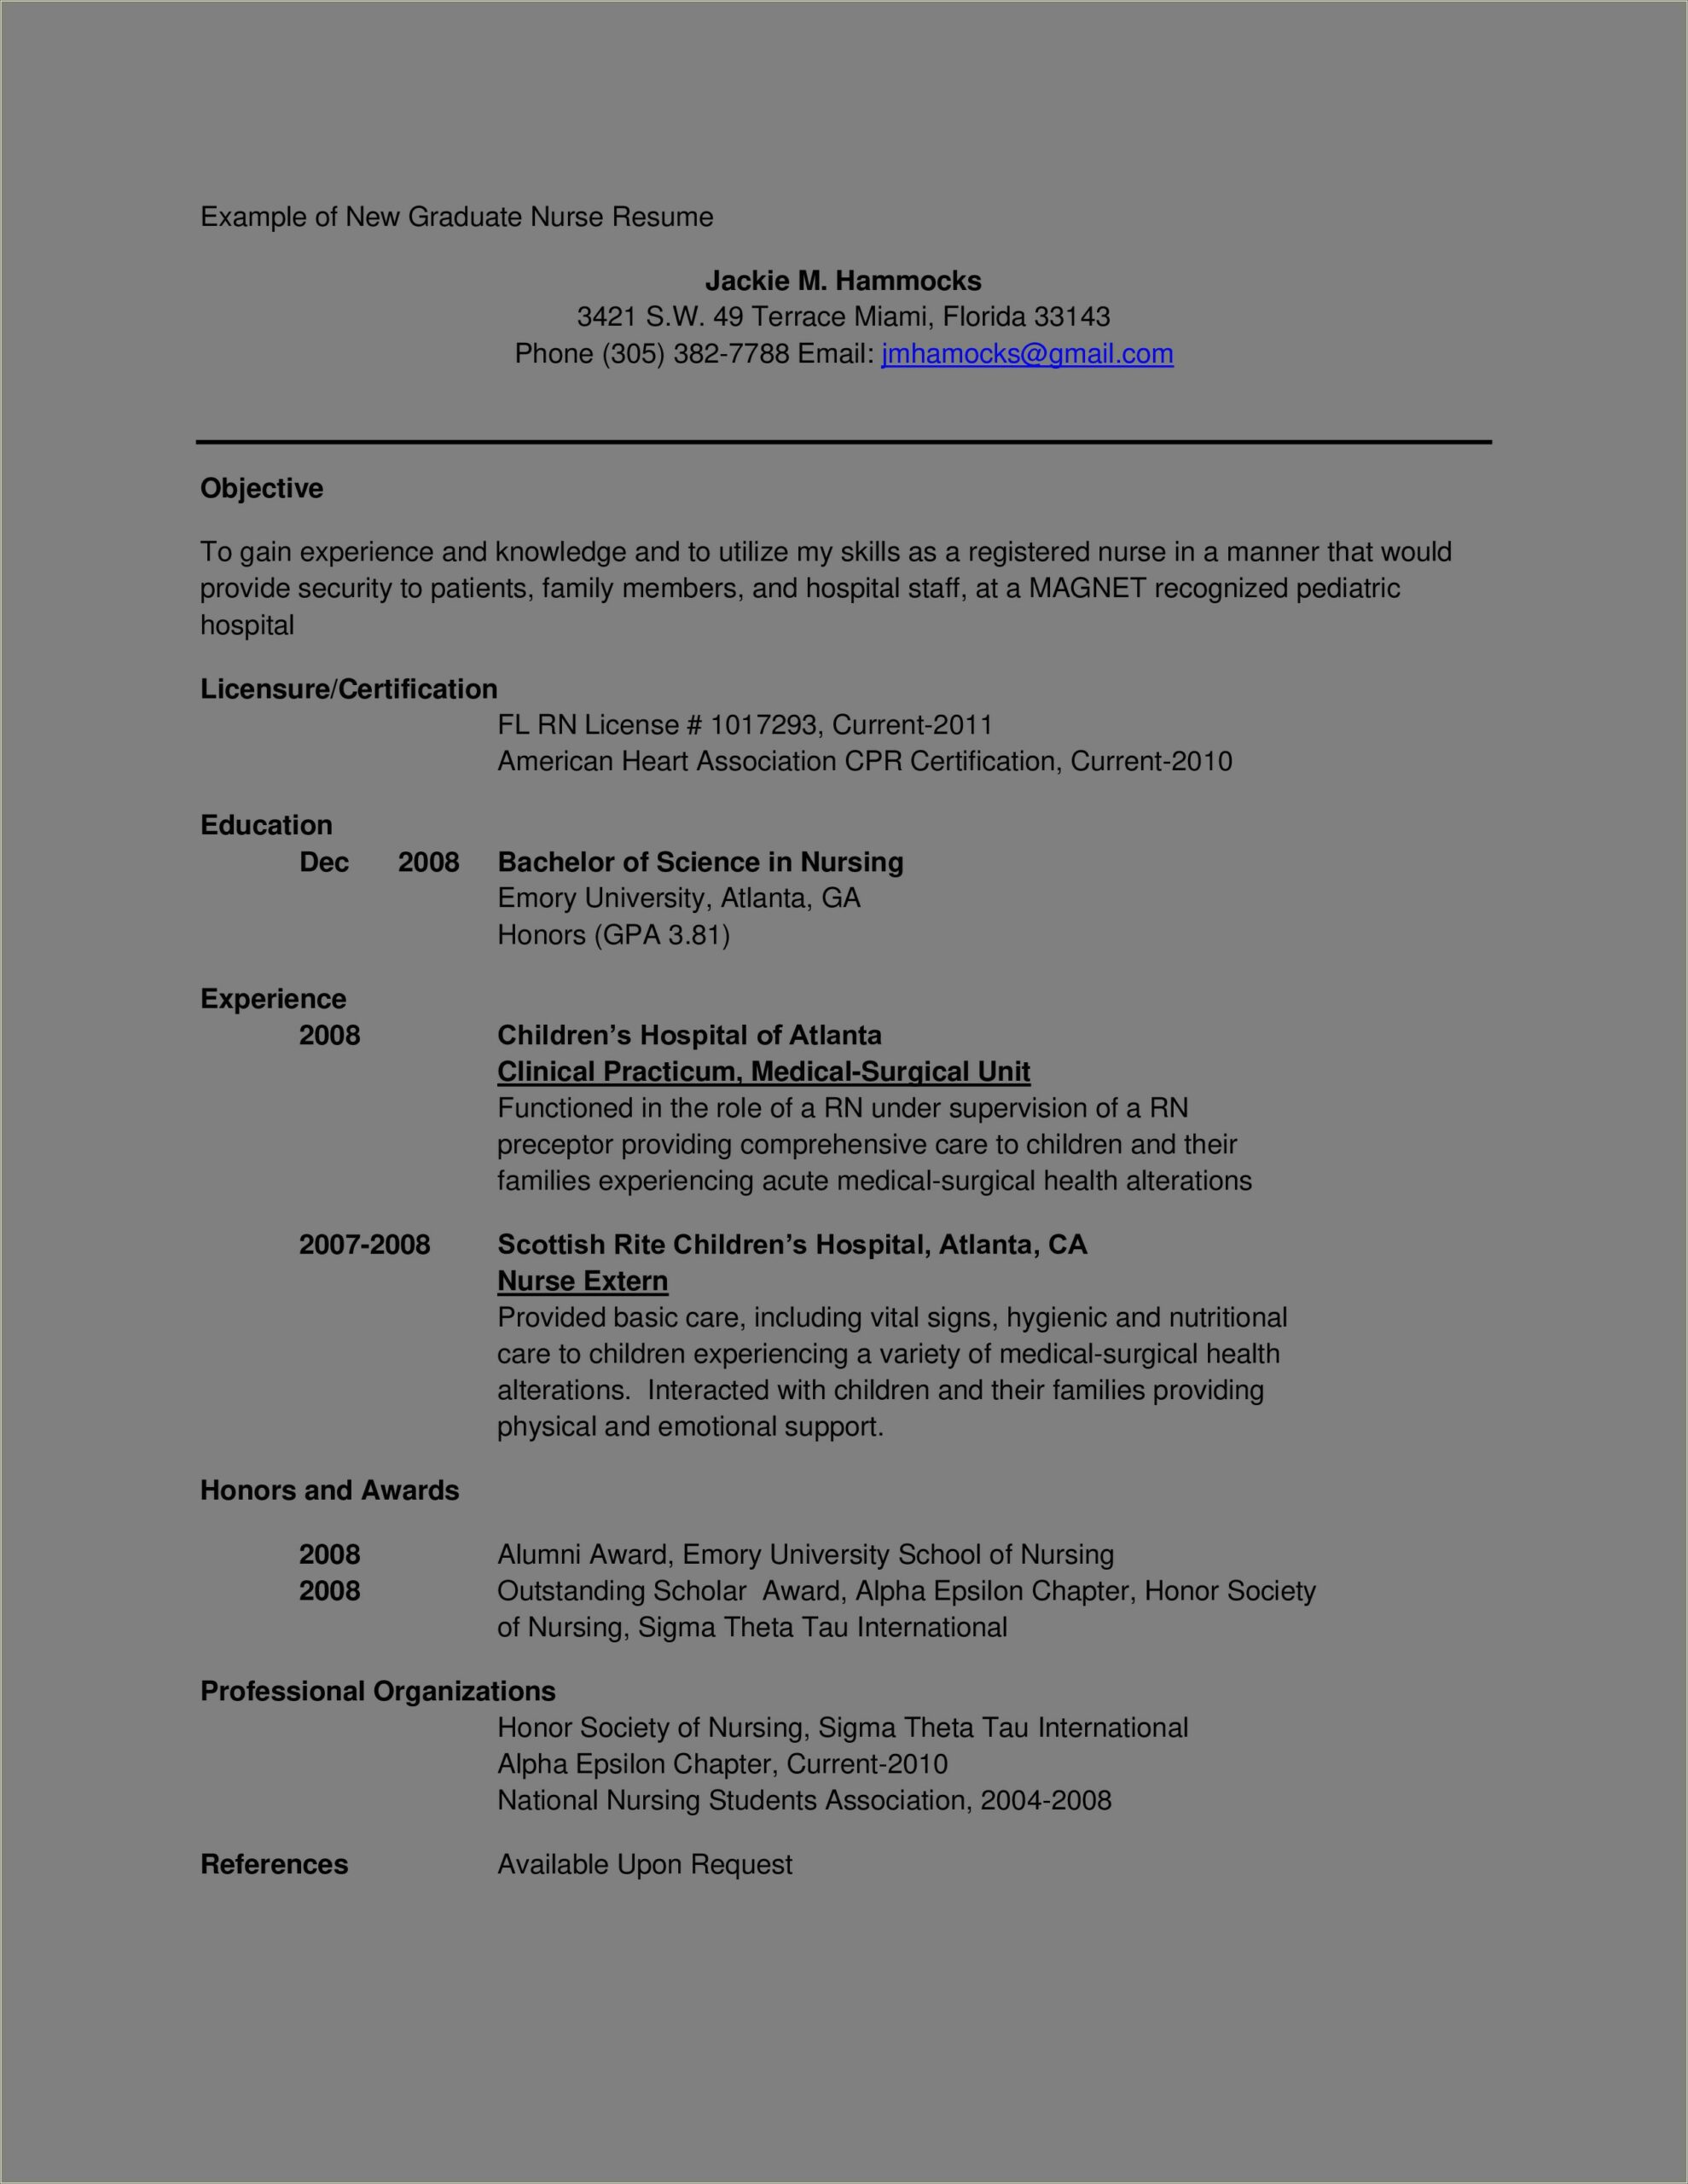 Sample Registered Nurse Resume Without Experience